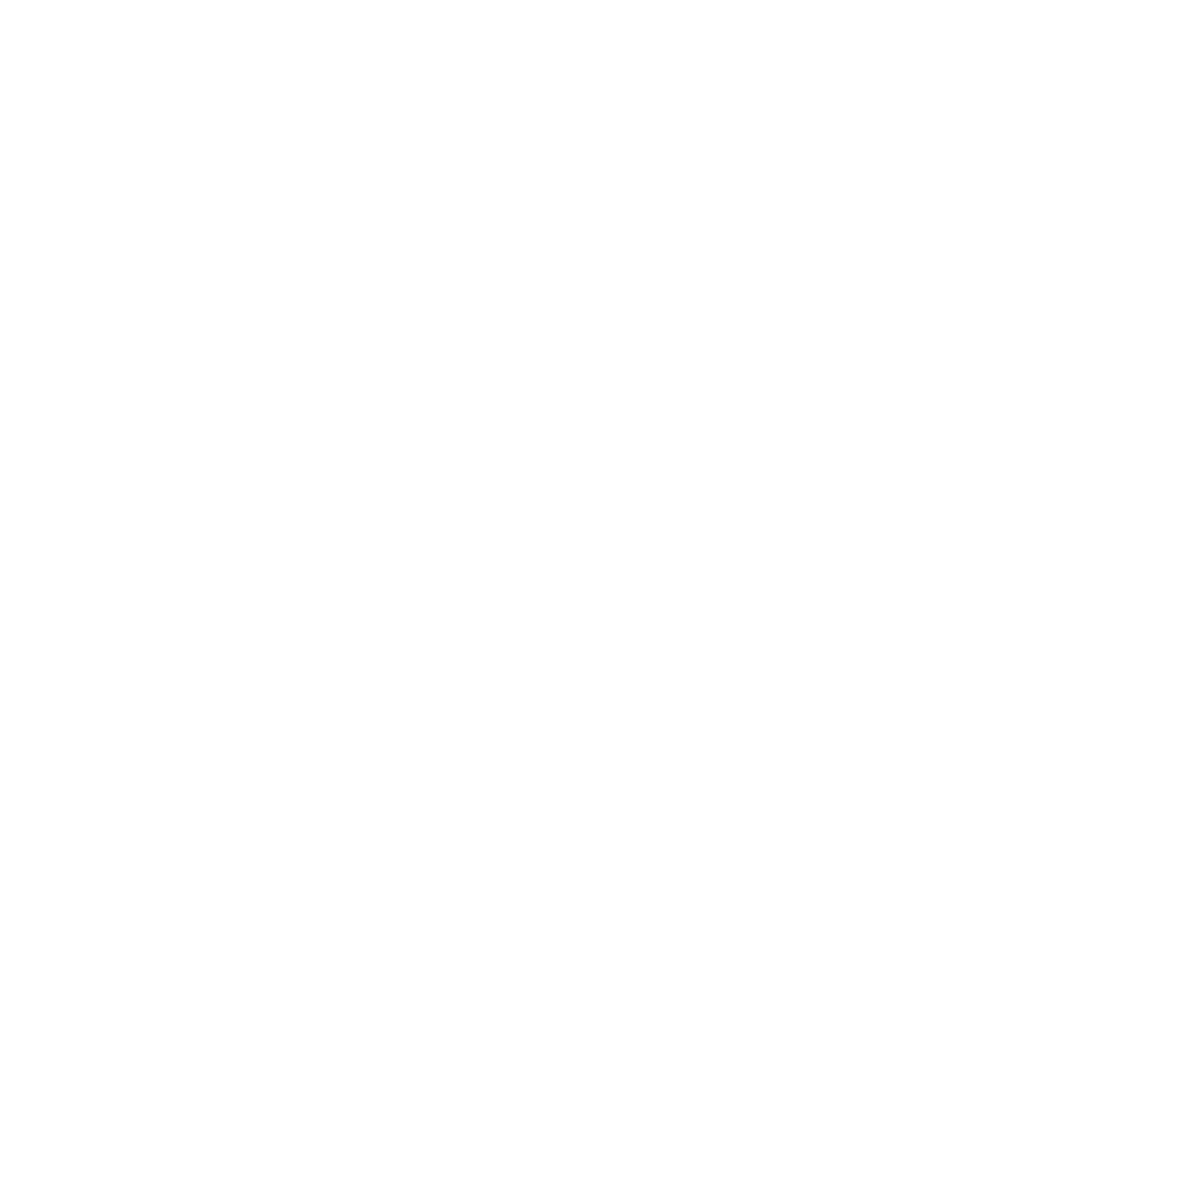 Sleep and eat conference logo for HoCoSo Track record